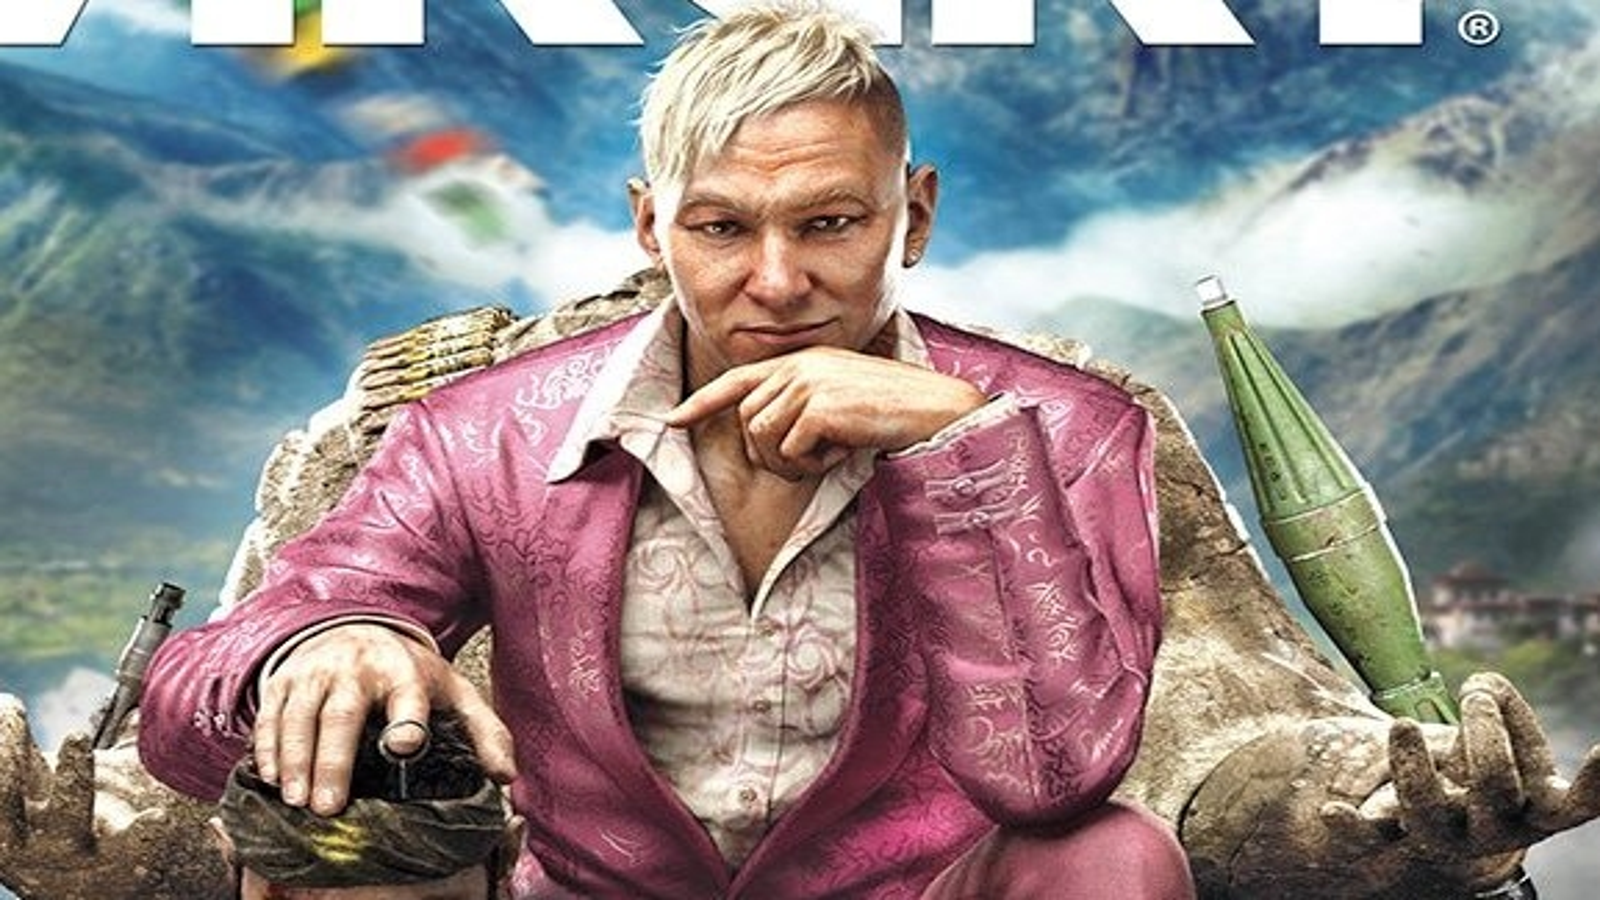 Make Your Own Pagan Min from Far Cry 4 Costume  Burgundy suit, How to  wear, Dress shirt colors